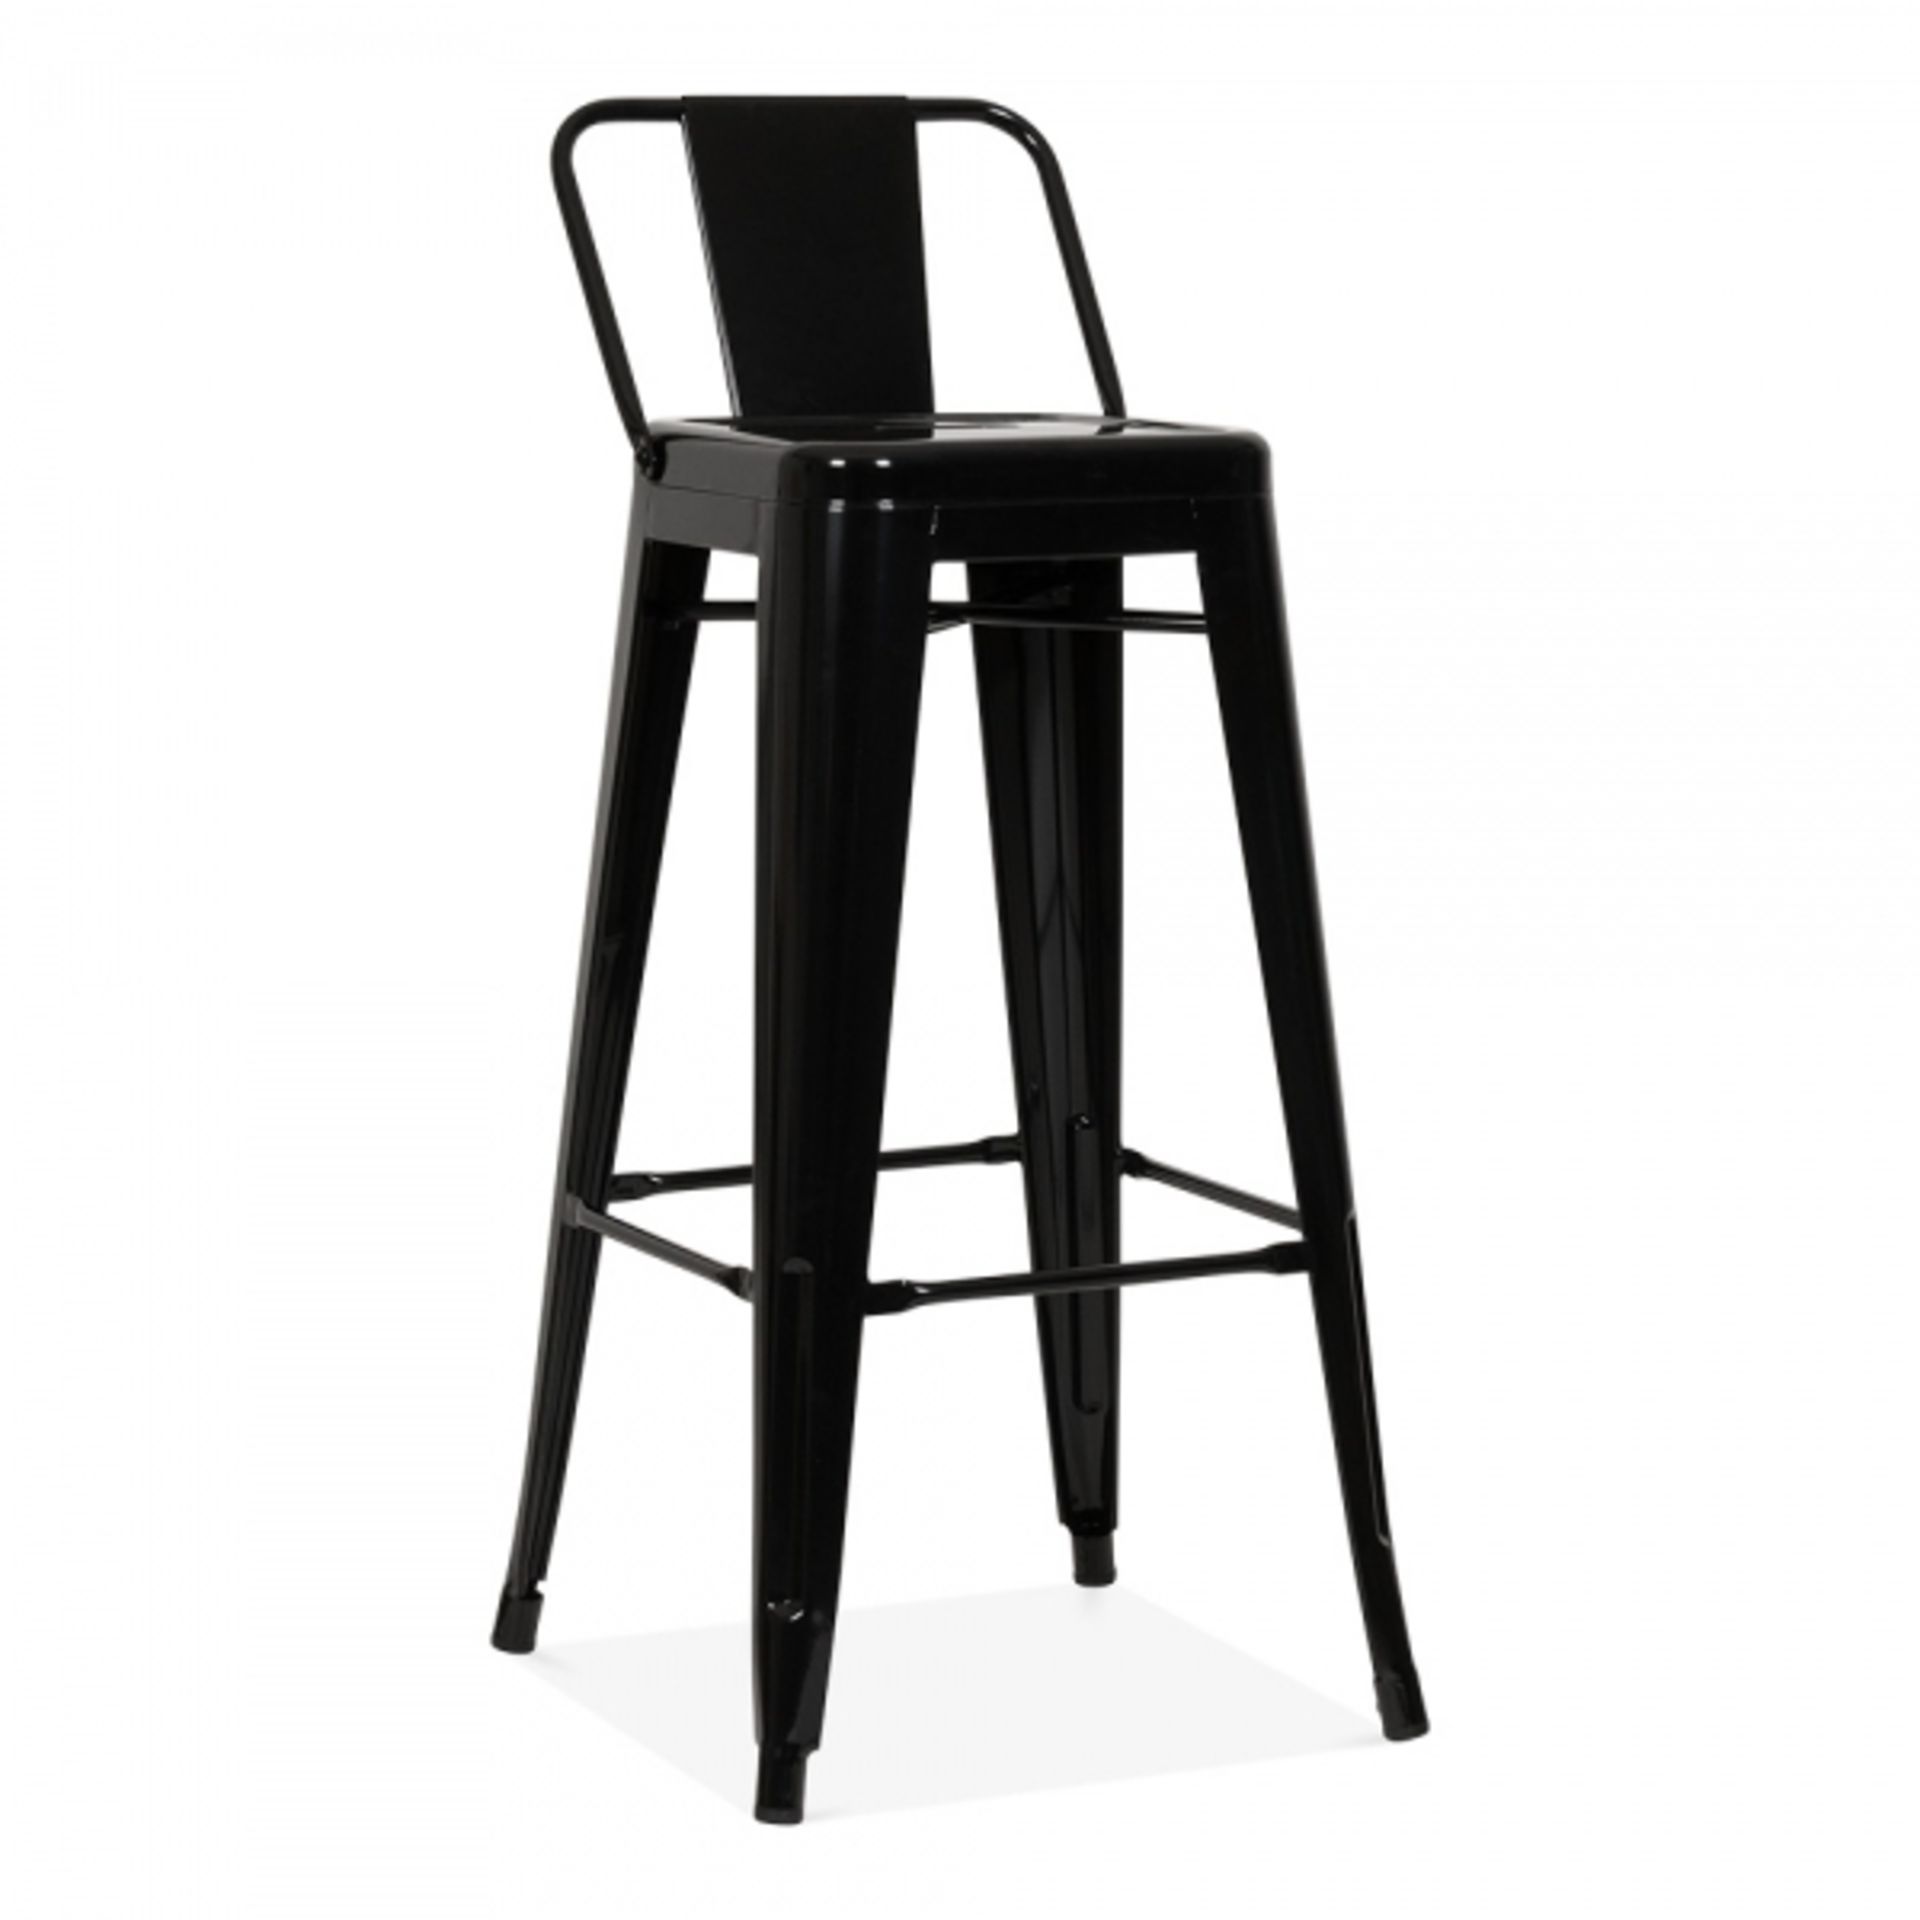 1 x Tolix Industrial Style Outdoor Bar Table and Bar Stool Set in Black - Includes 1 x Bar Table and - Image 5 of 9